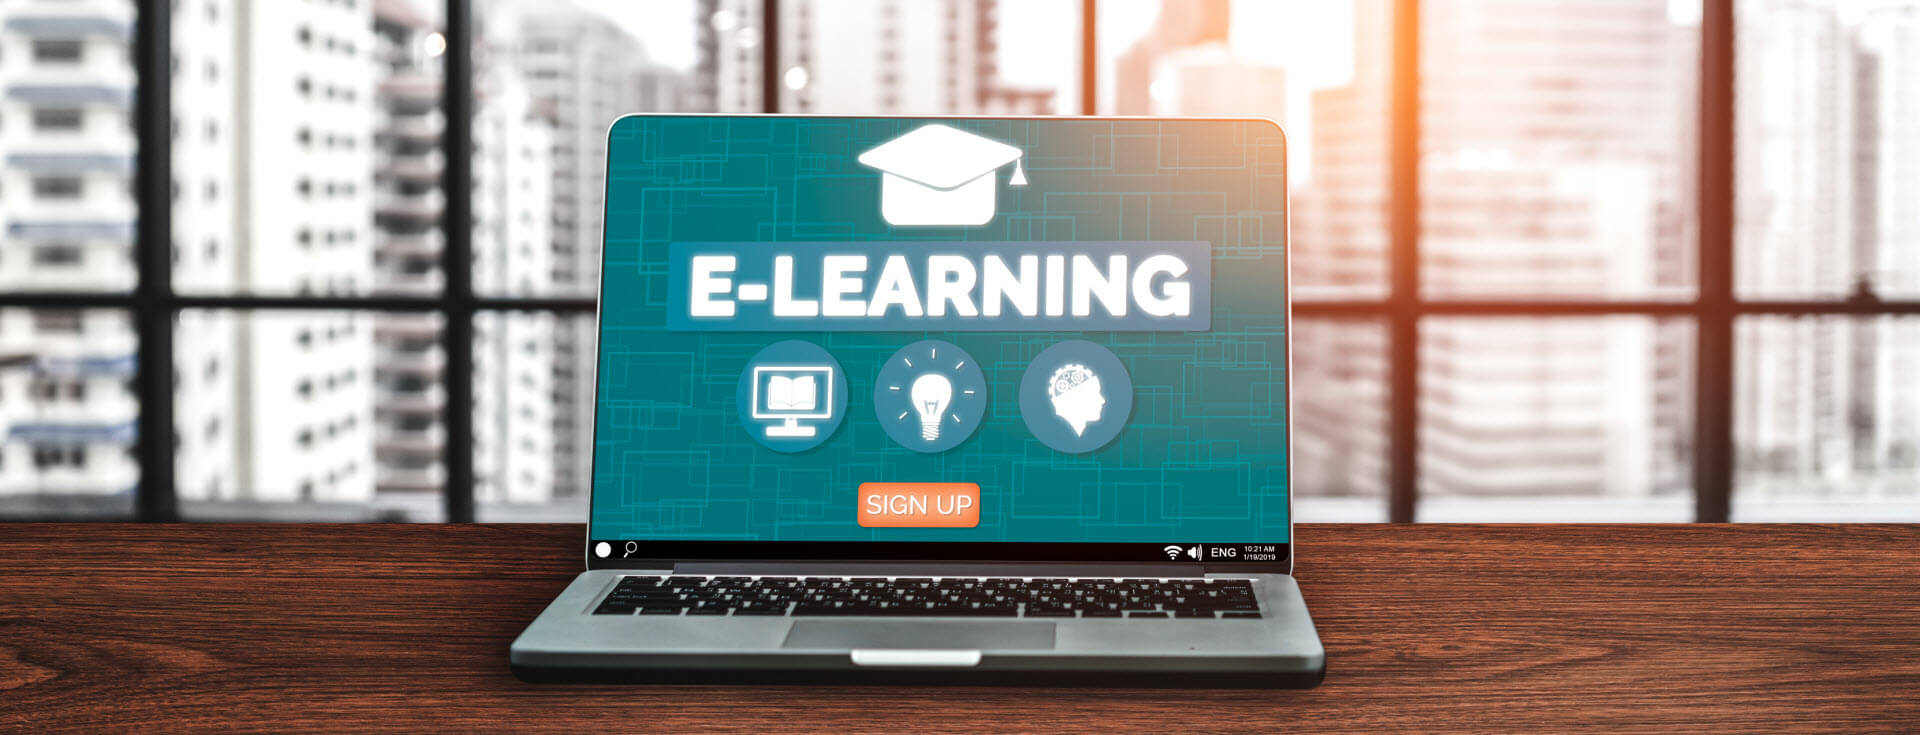 TOP-7 e-learning IT companies